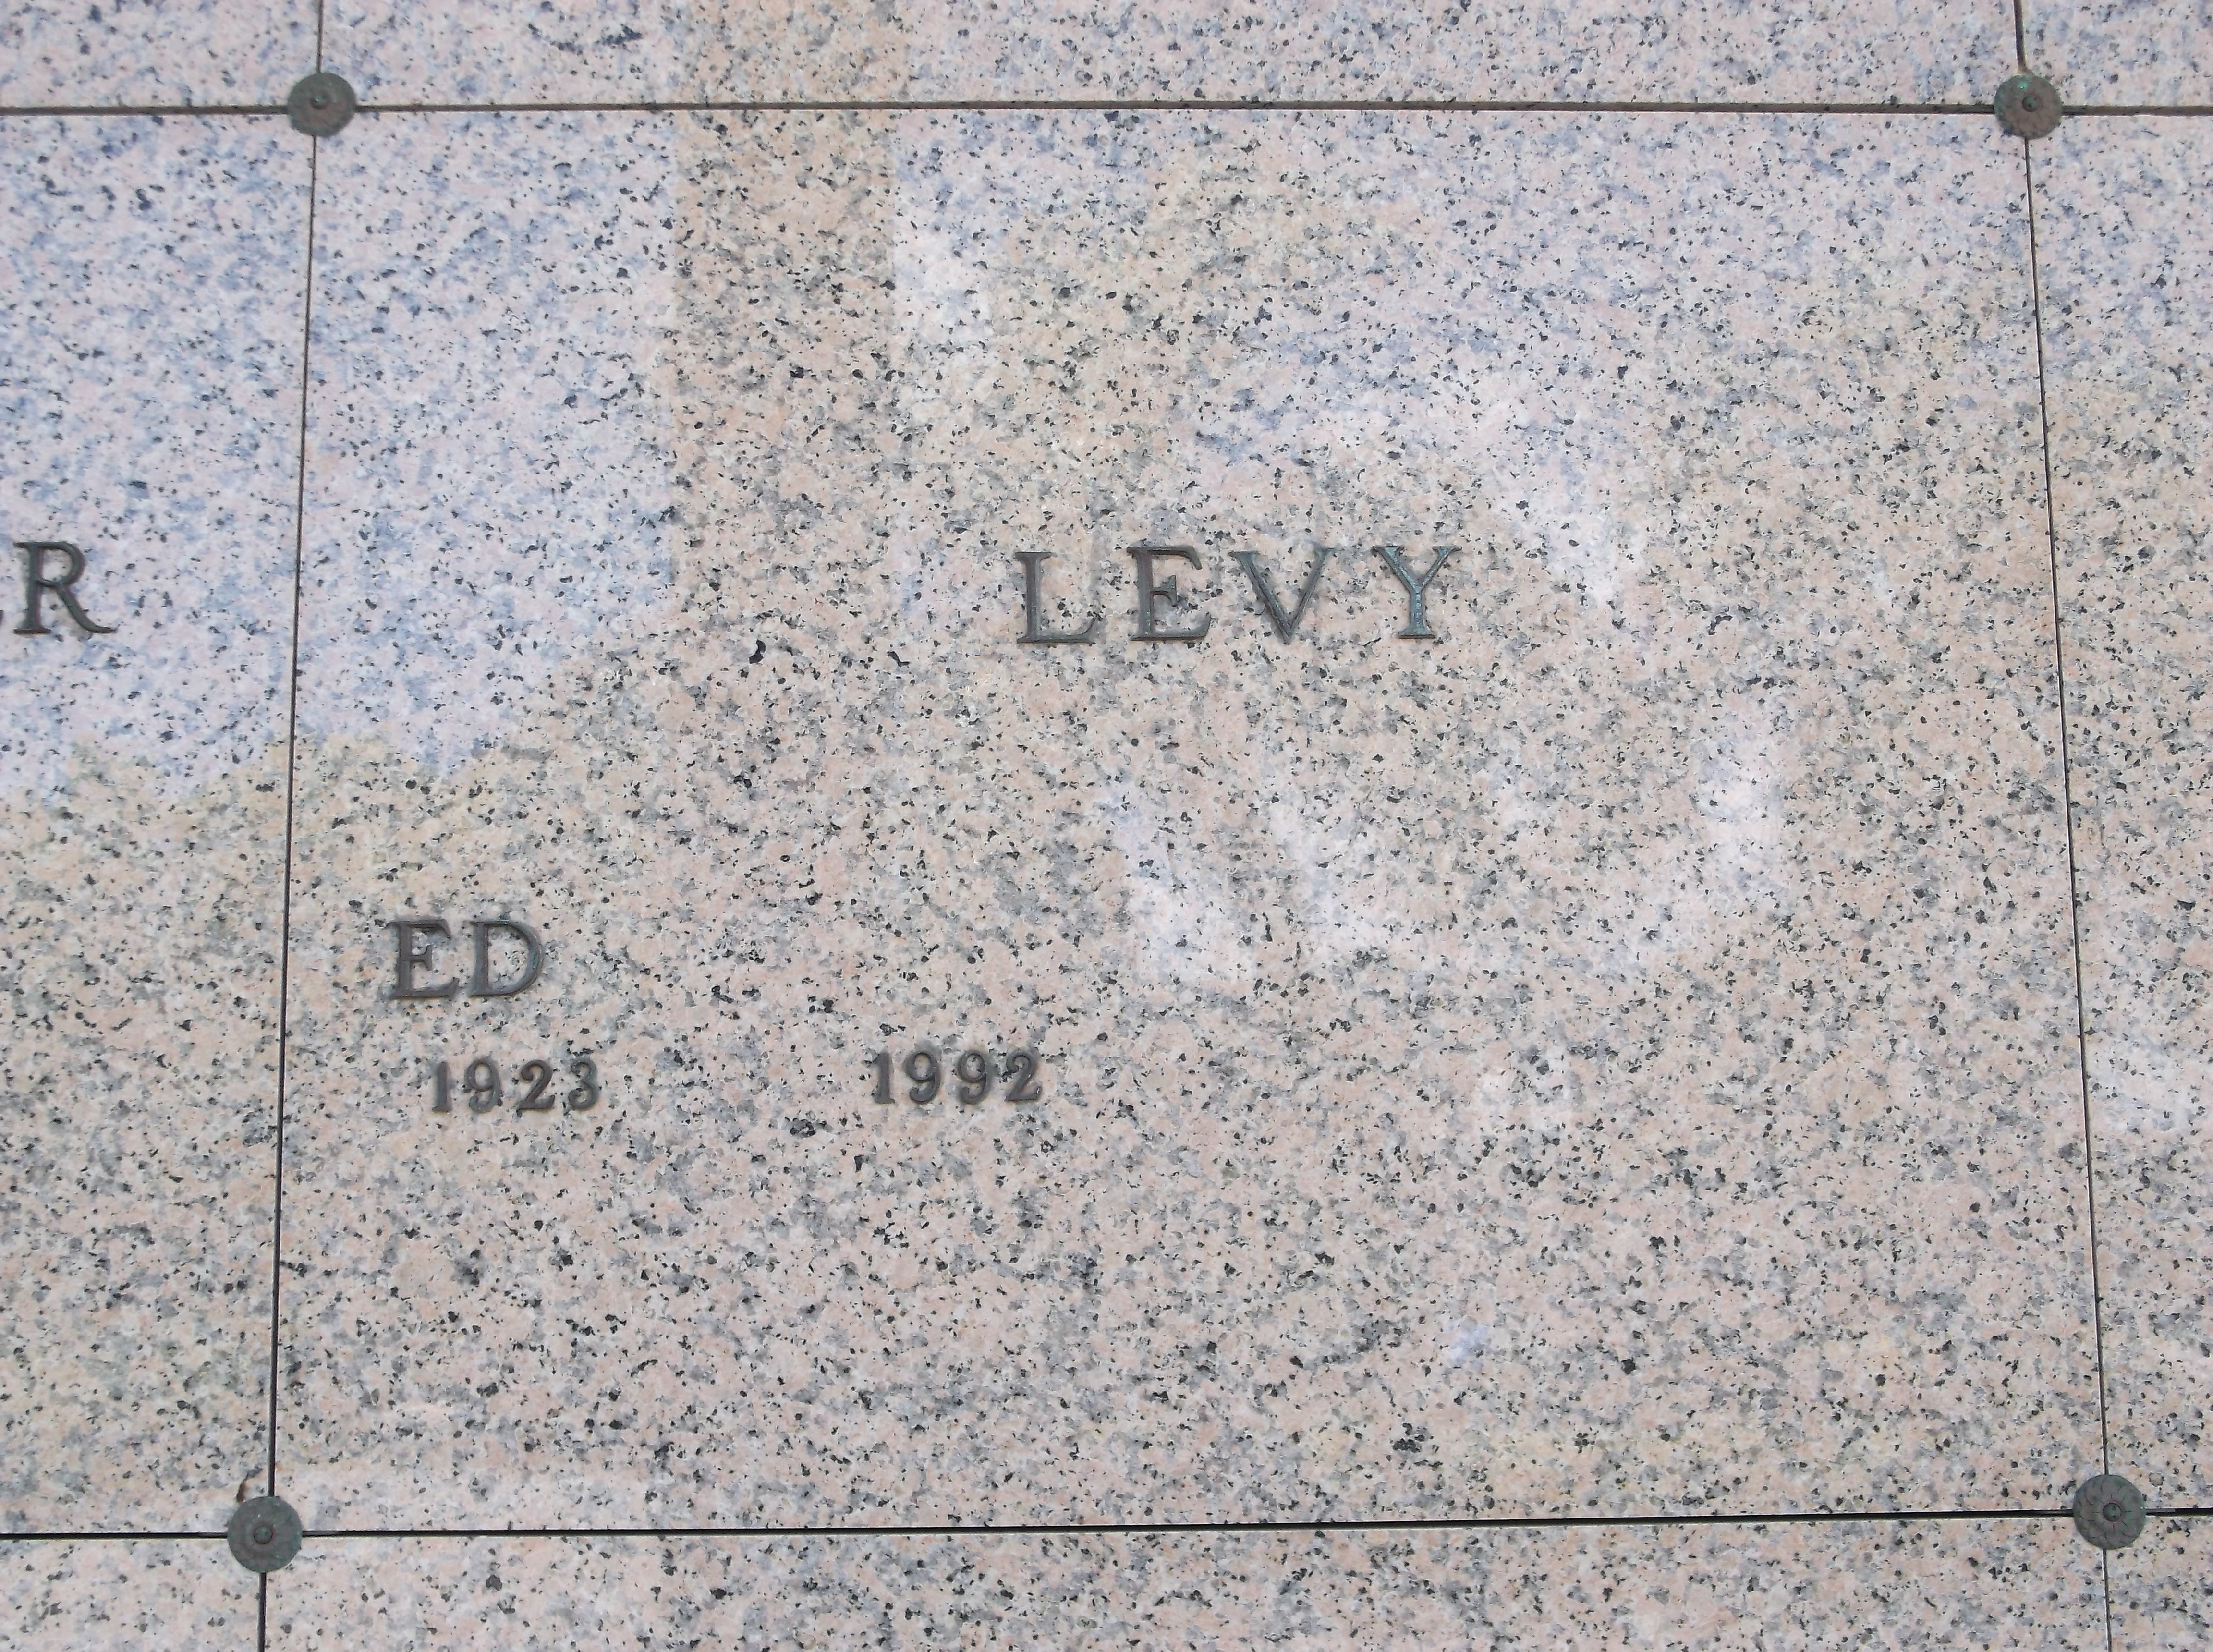 Ed Levy